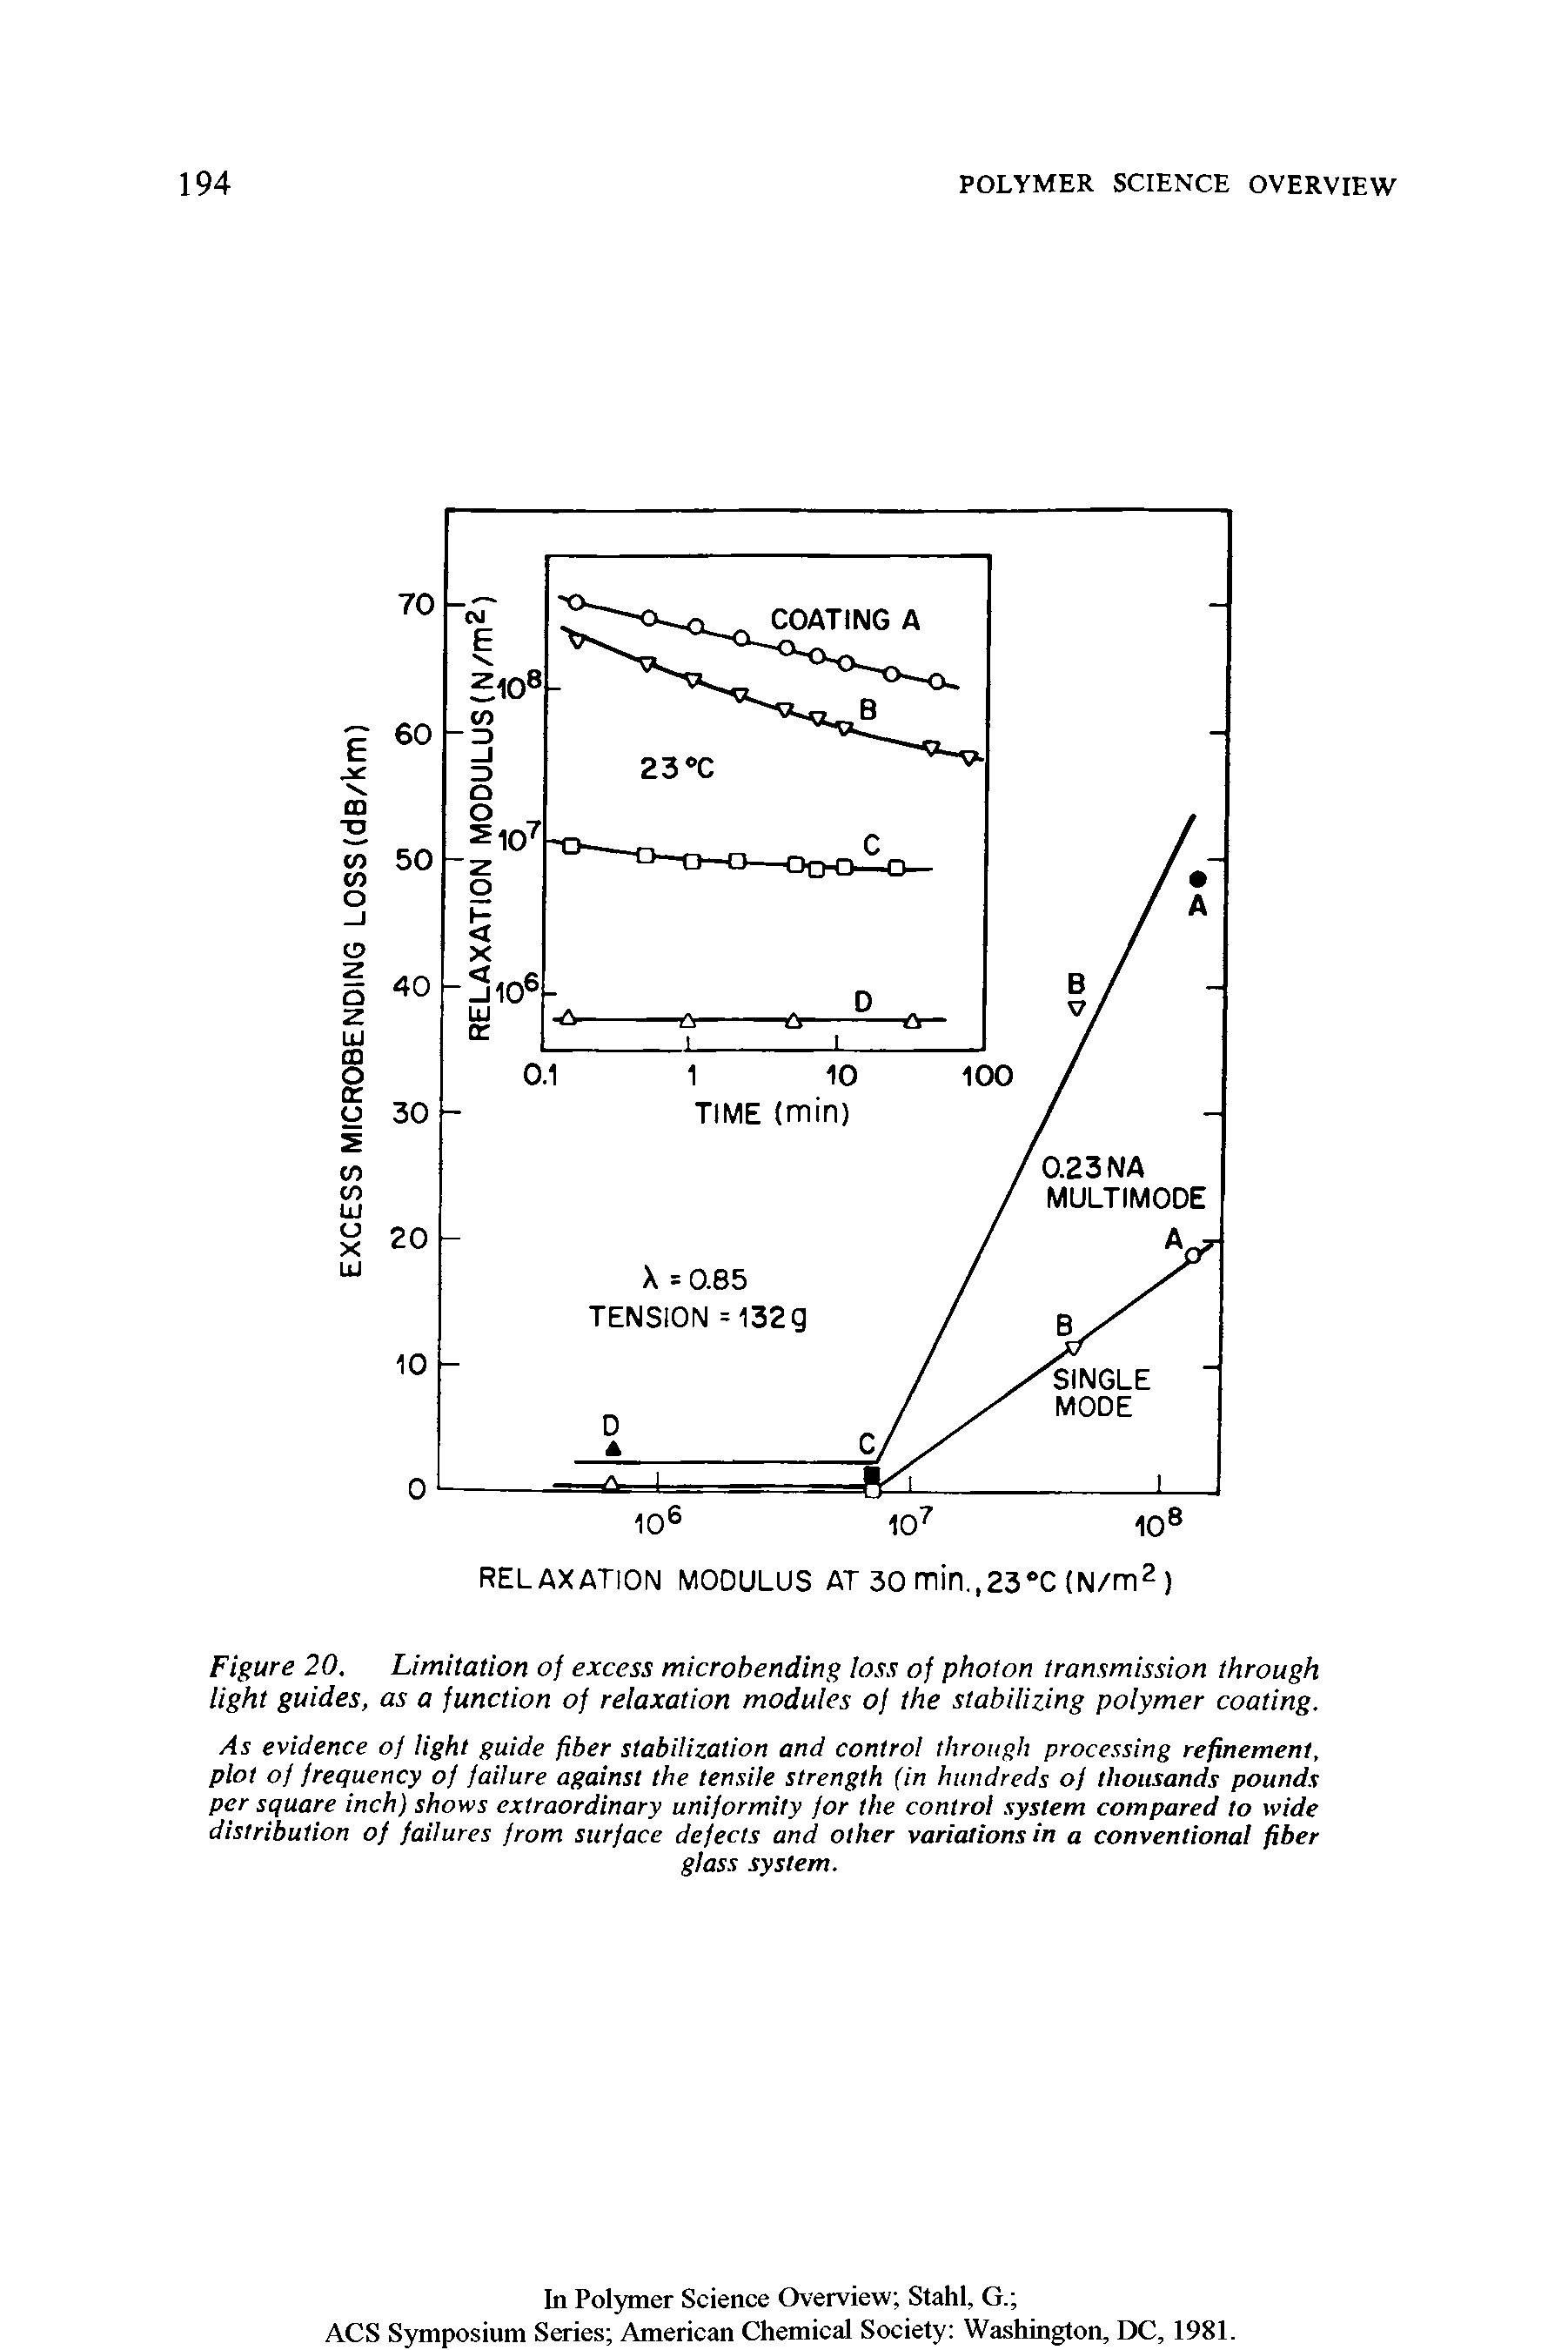 Figure 20. Limitation of excess microbending loss of photon transmission through light guides, as a function of relaxation modules of the stabilizing polymer coating.